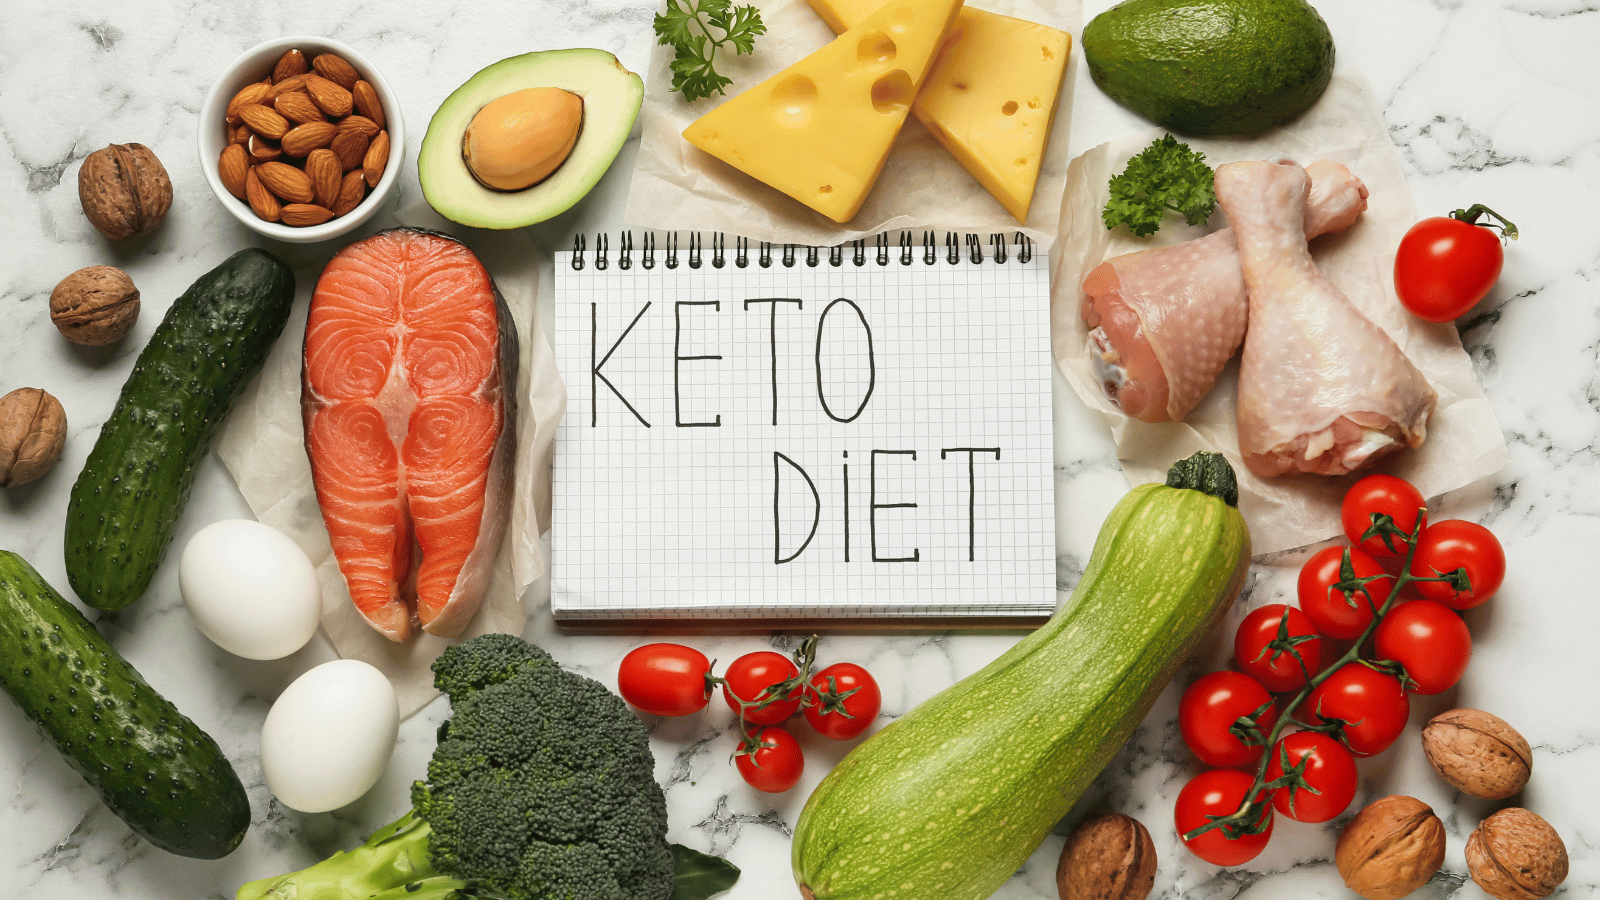 The Complete Guide To Intermittent Fasting And The Ketogenic Diet!